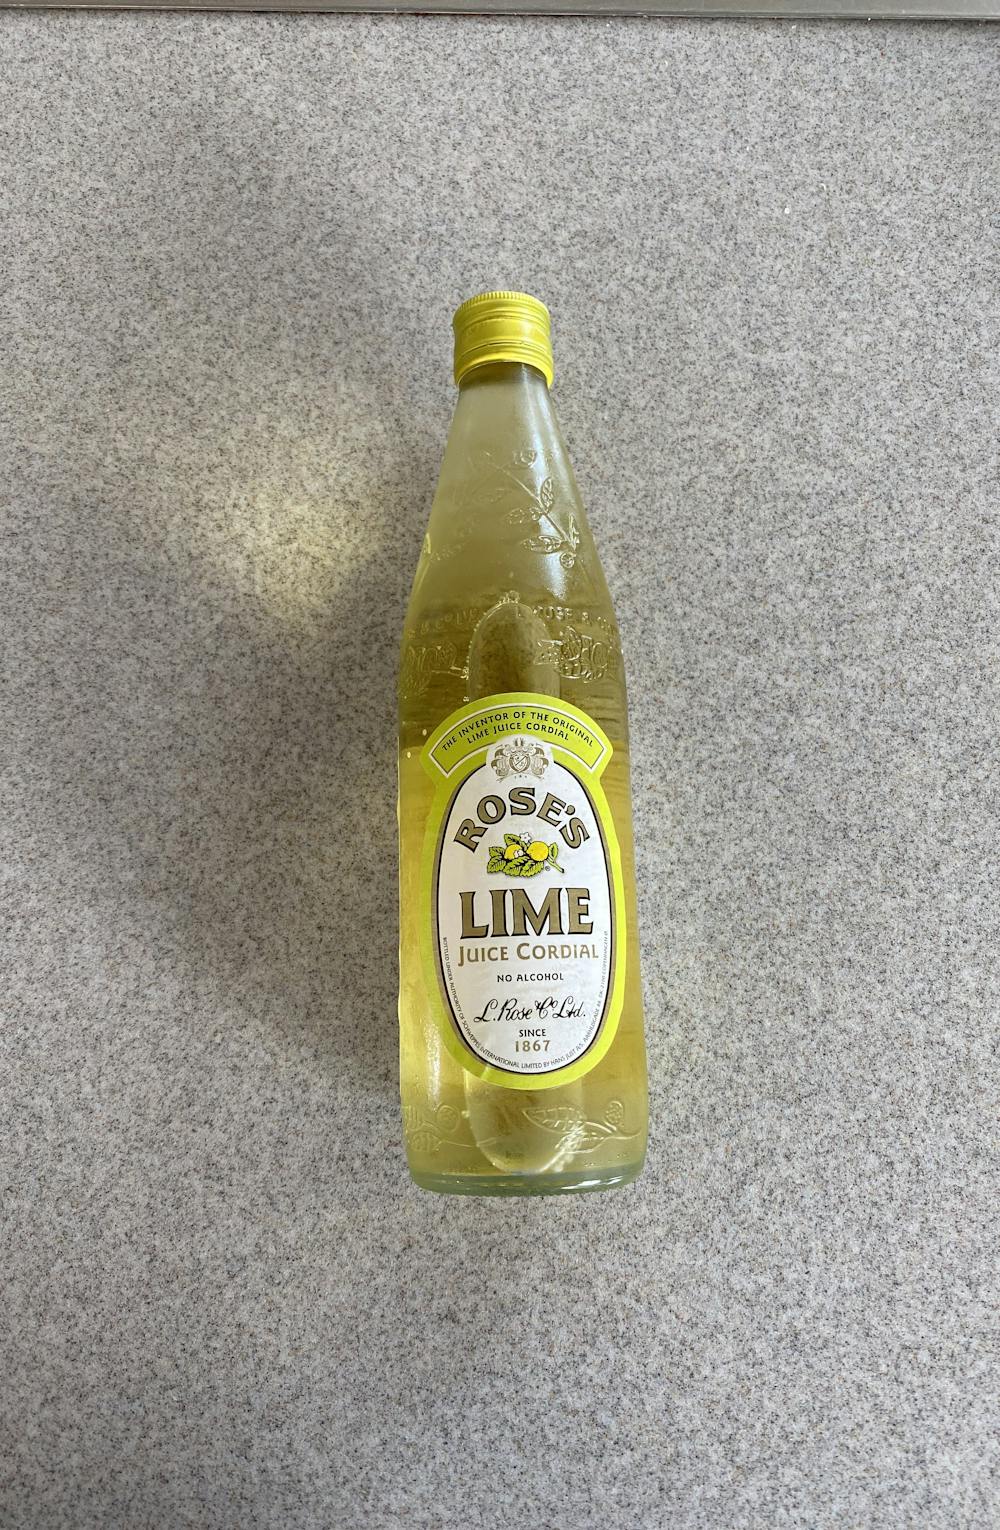 Lime juice cordial, Rose`s lime